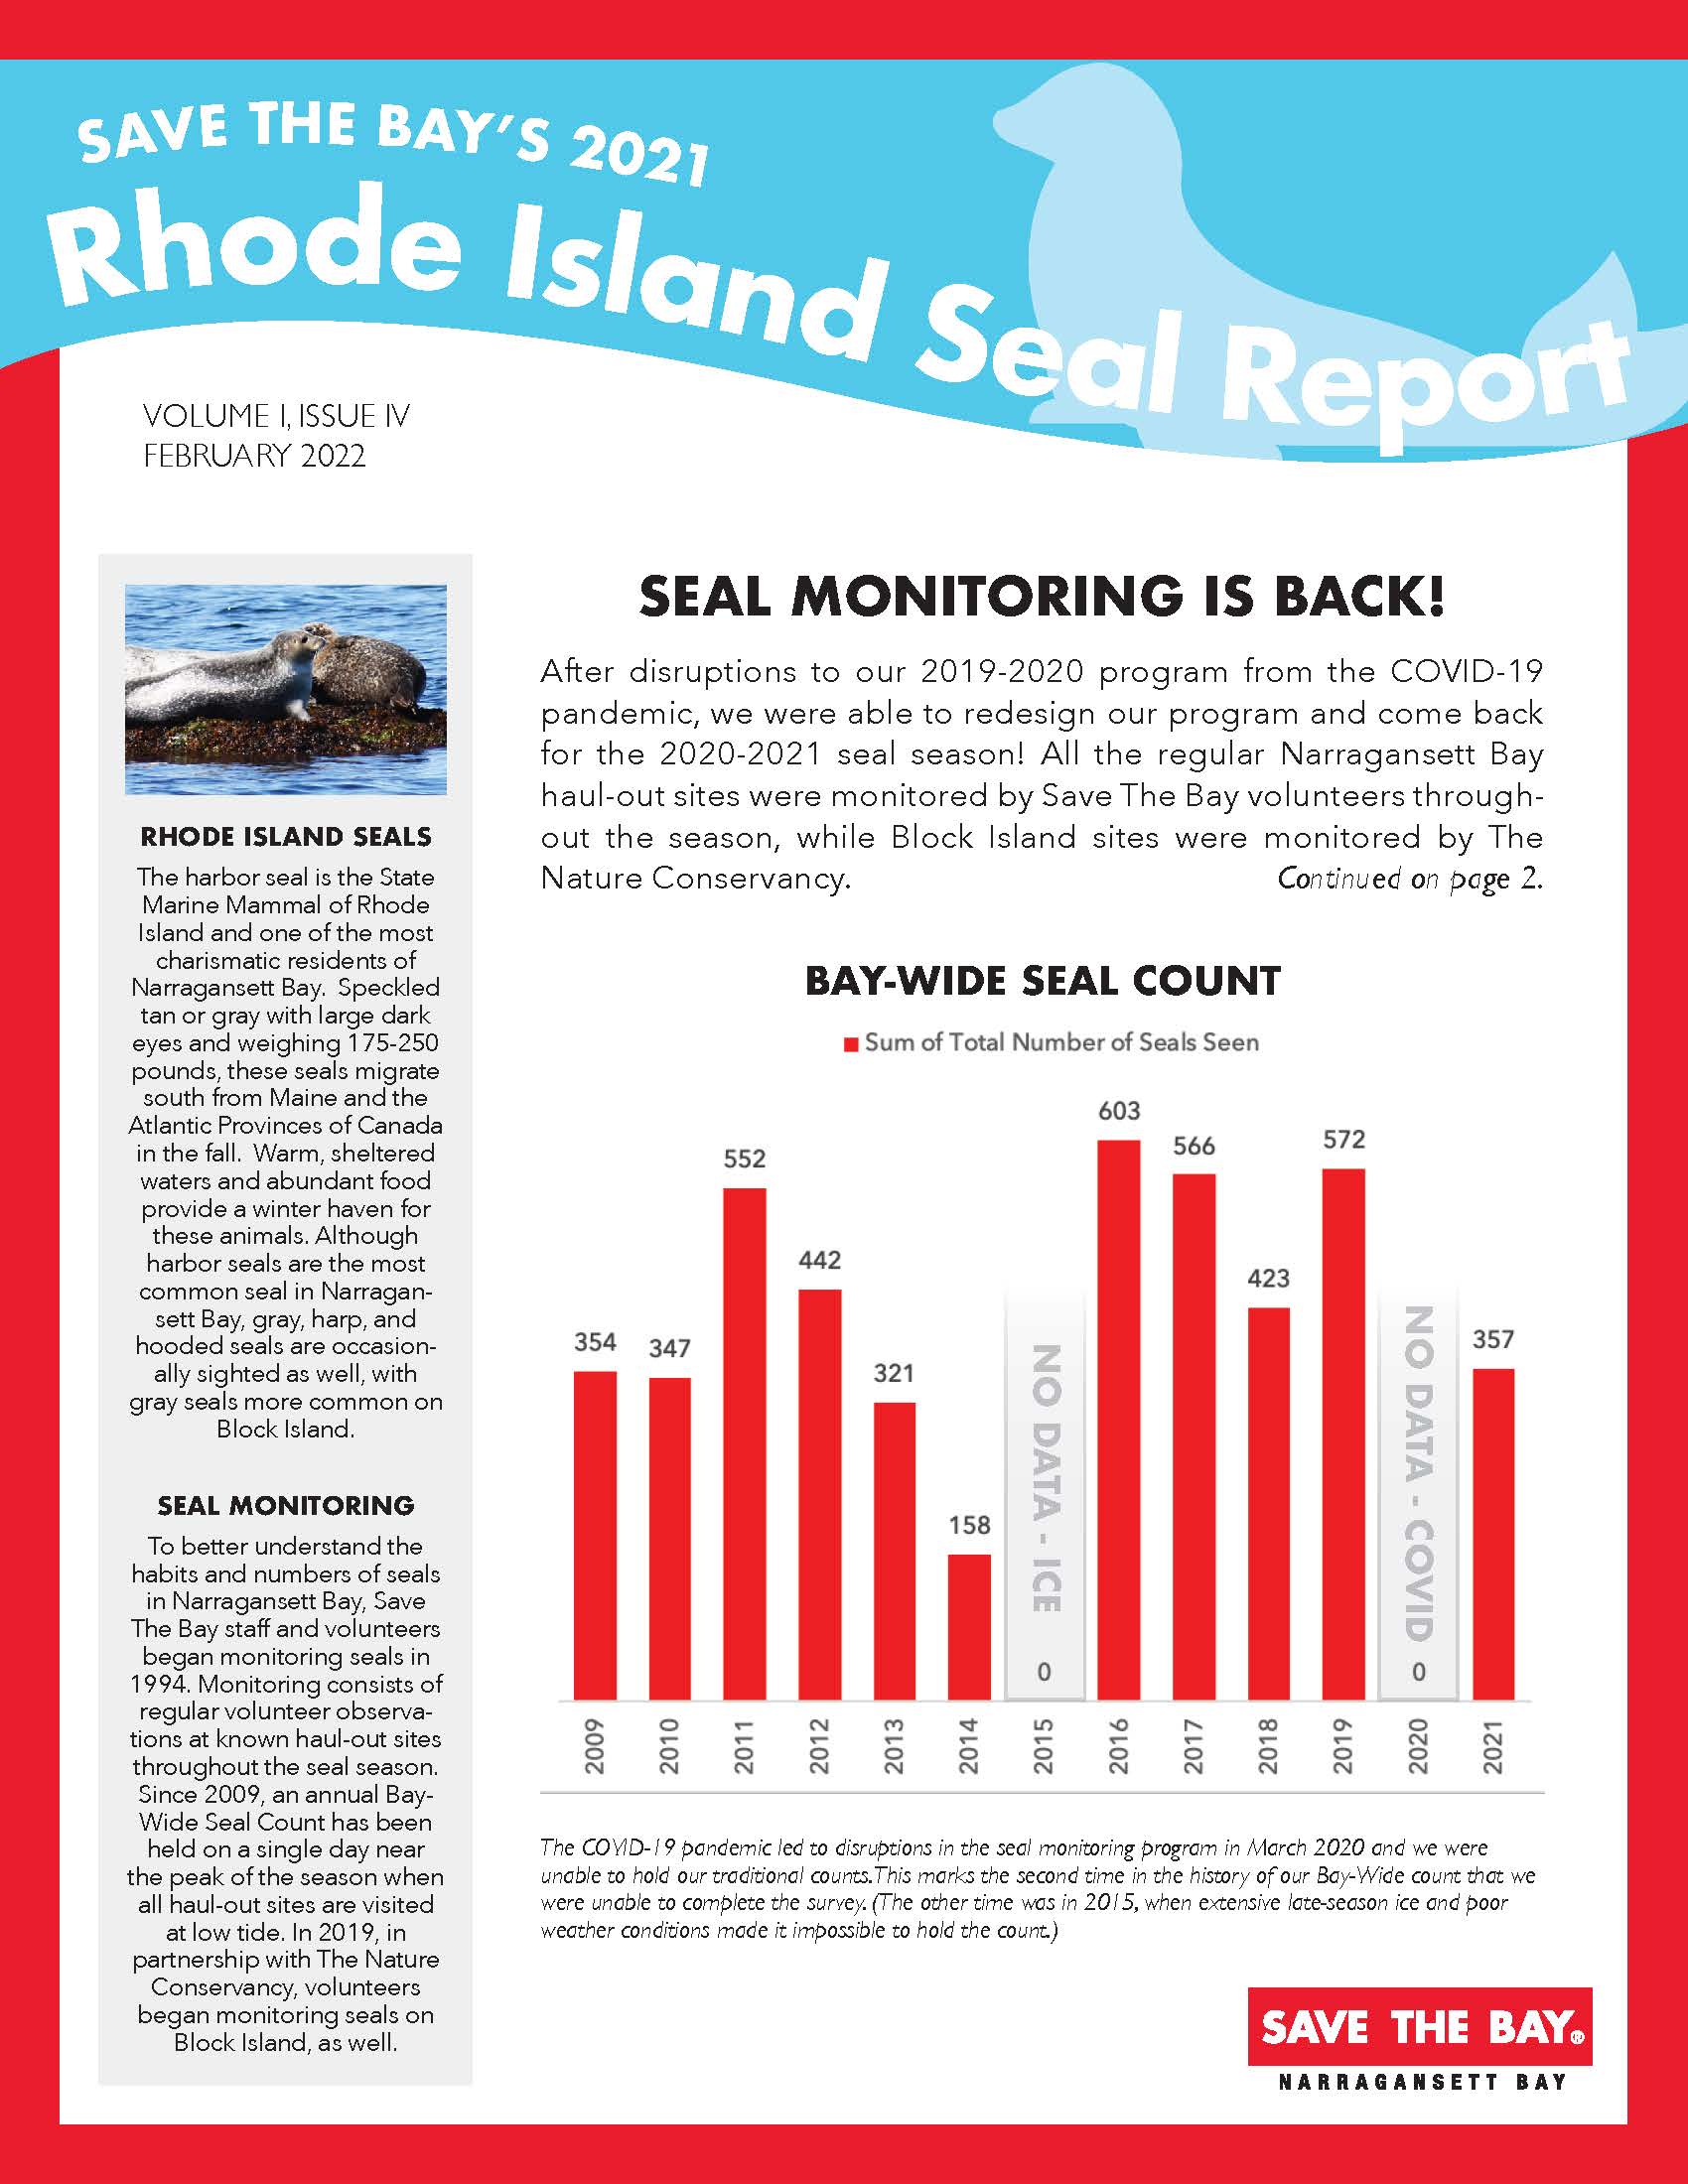 The front cover of the 2021 "Seal Report," featuring a headline that reads "Seal Monitoring is Back!" and a table highlighting the findings of the last several years.